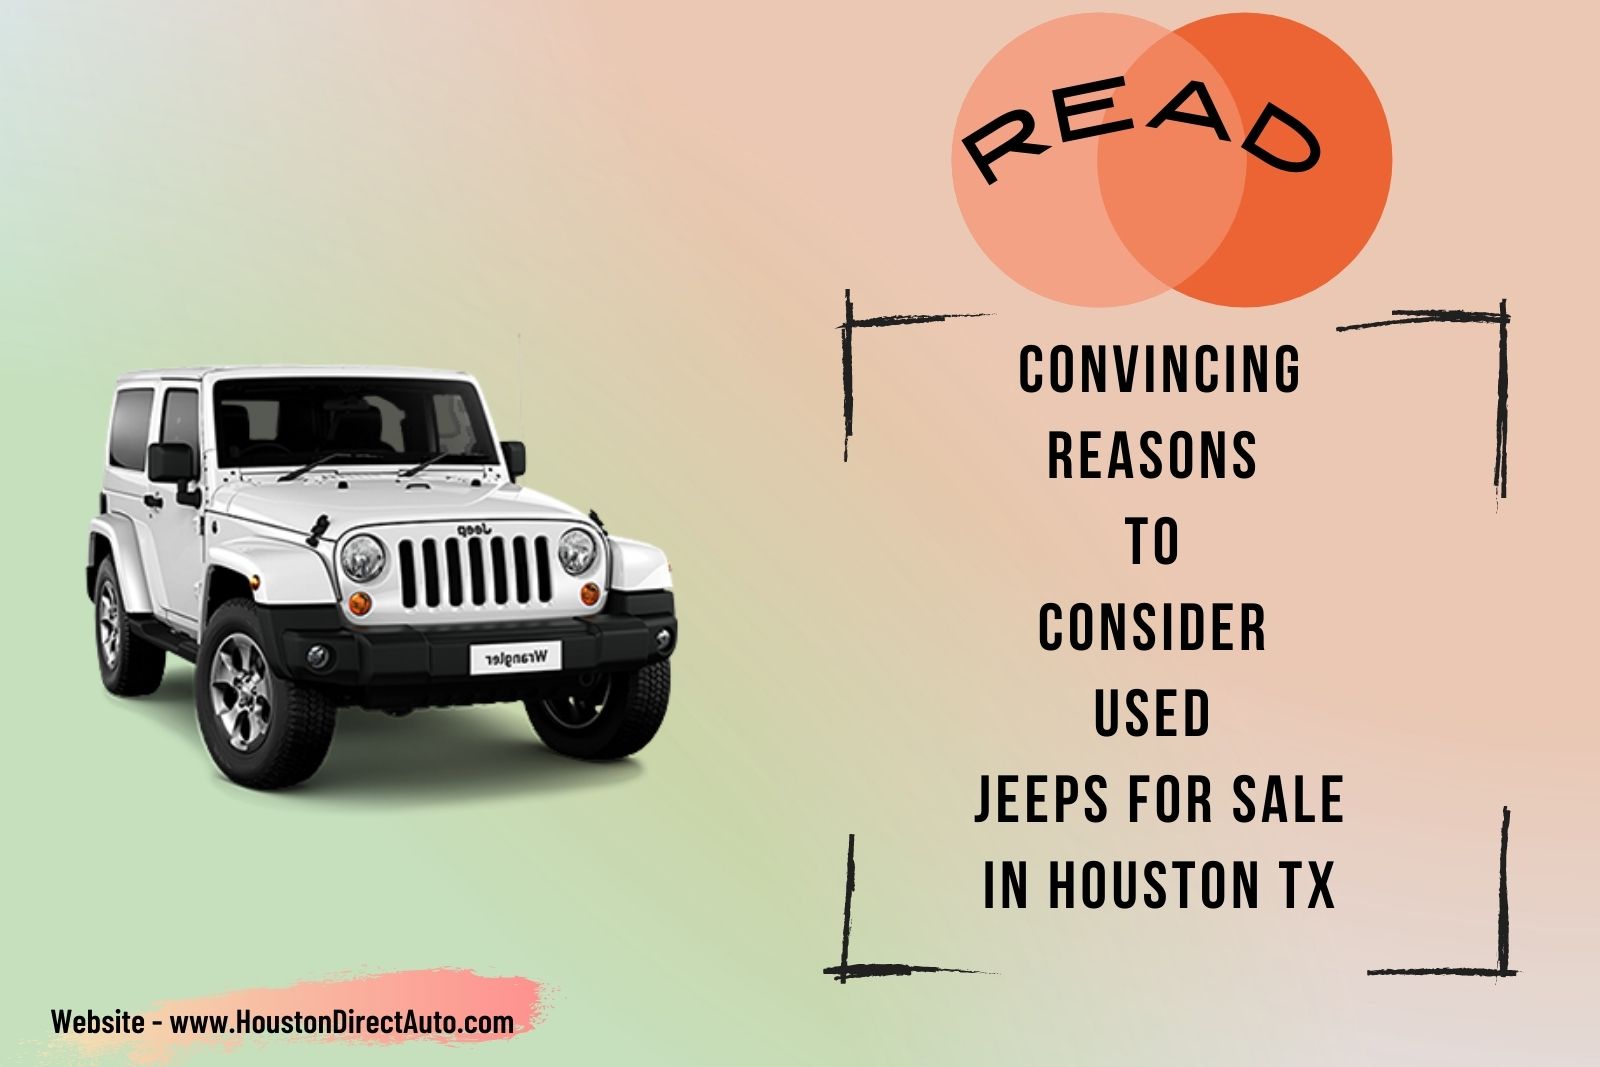 Pre Owned Jeeps For Sale In Houston TX